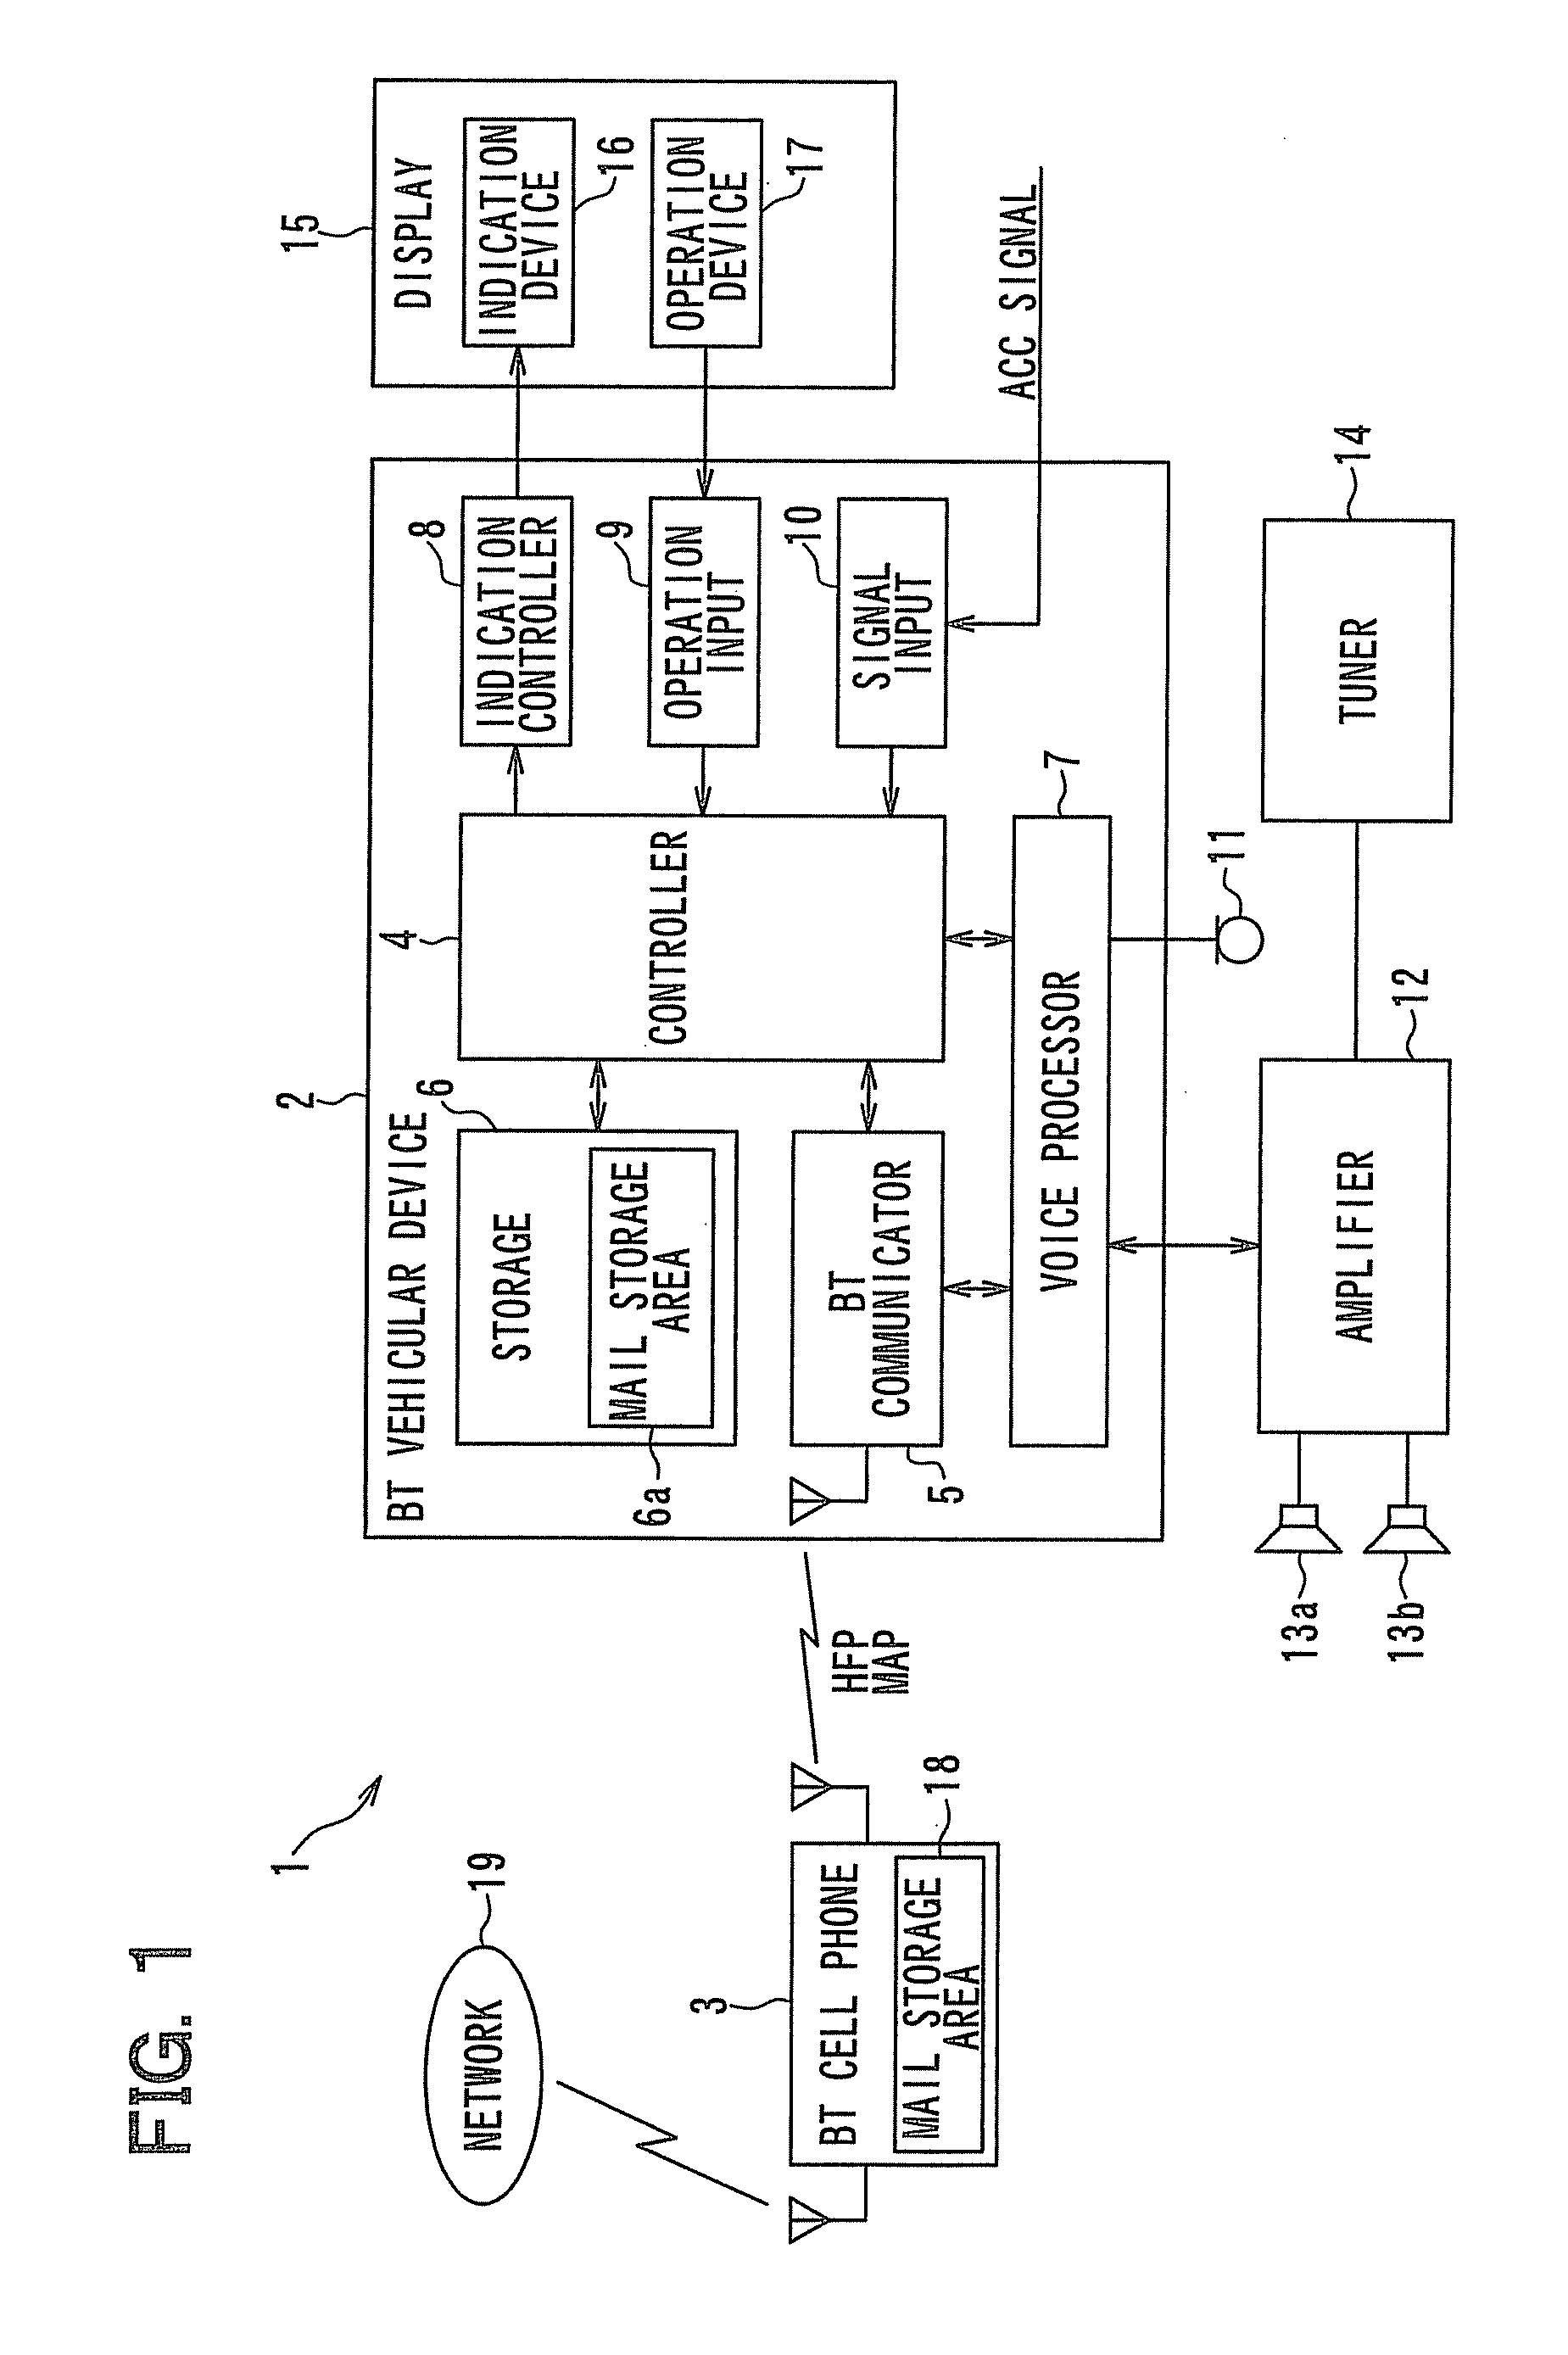 Electronic mail data processing device and method for processing electronic mail data